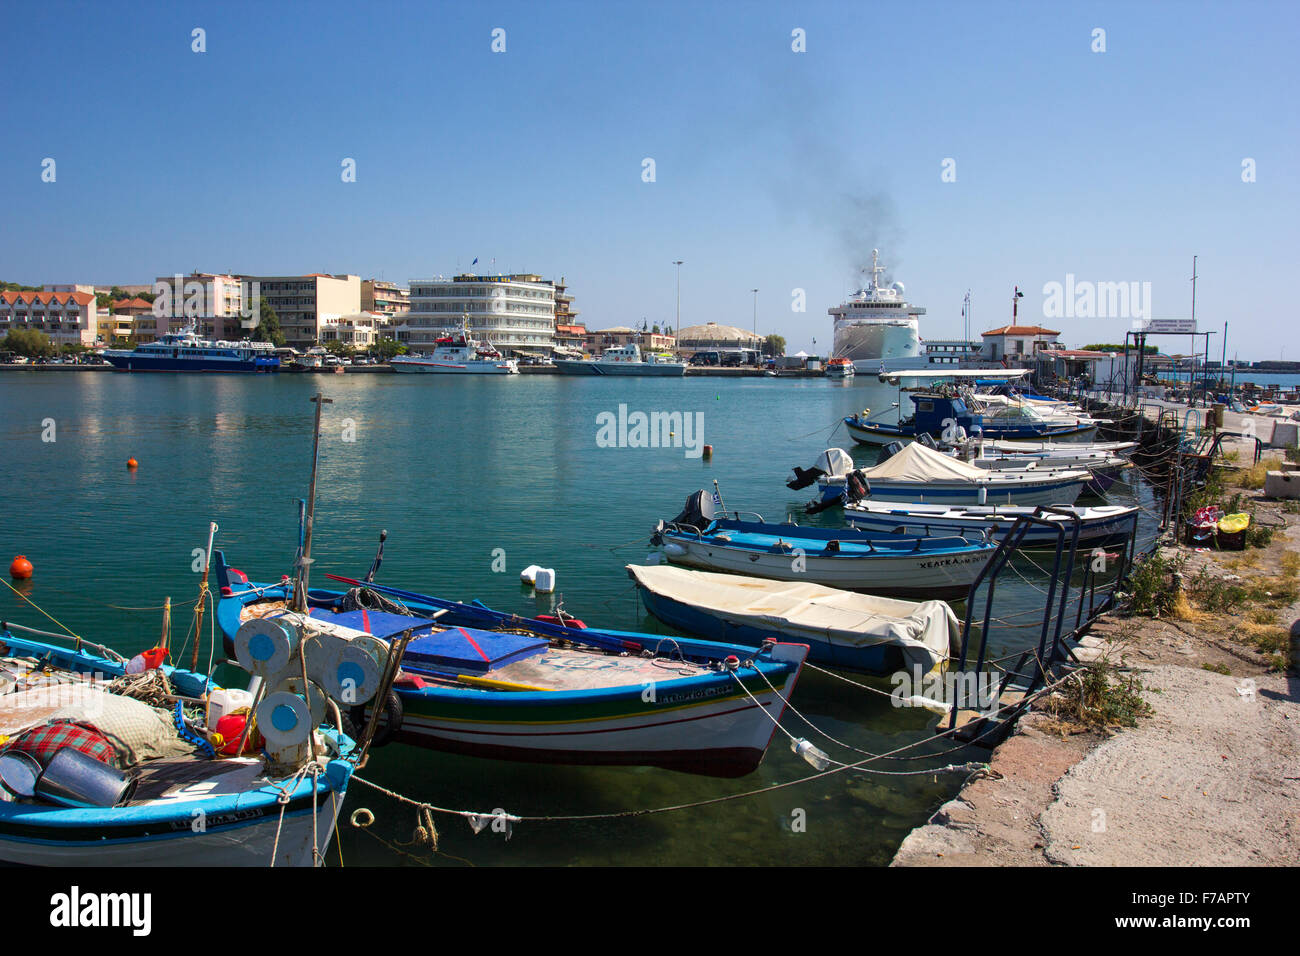 Small boats in Lesbos Harbour Stock Photo